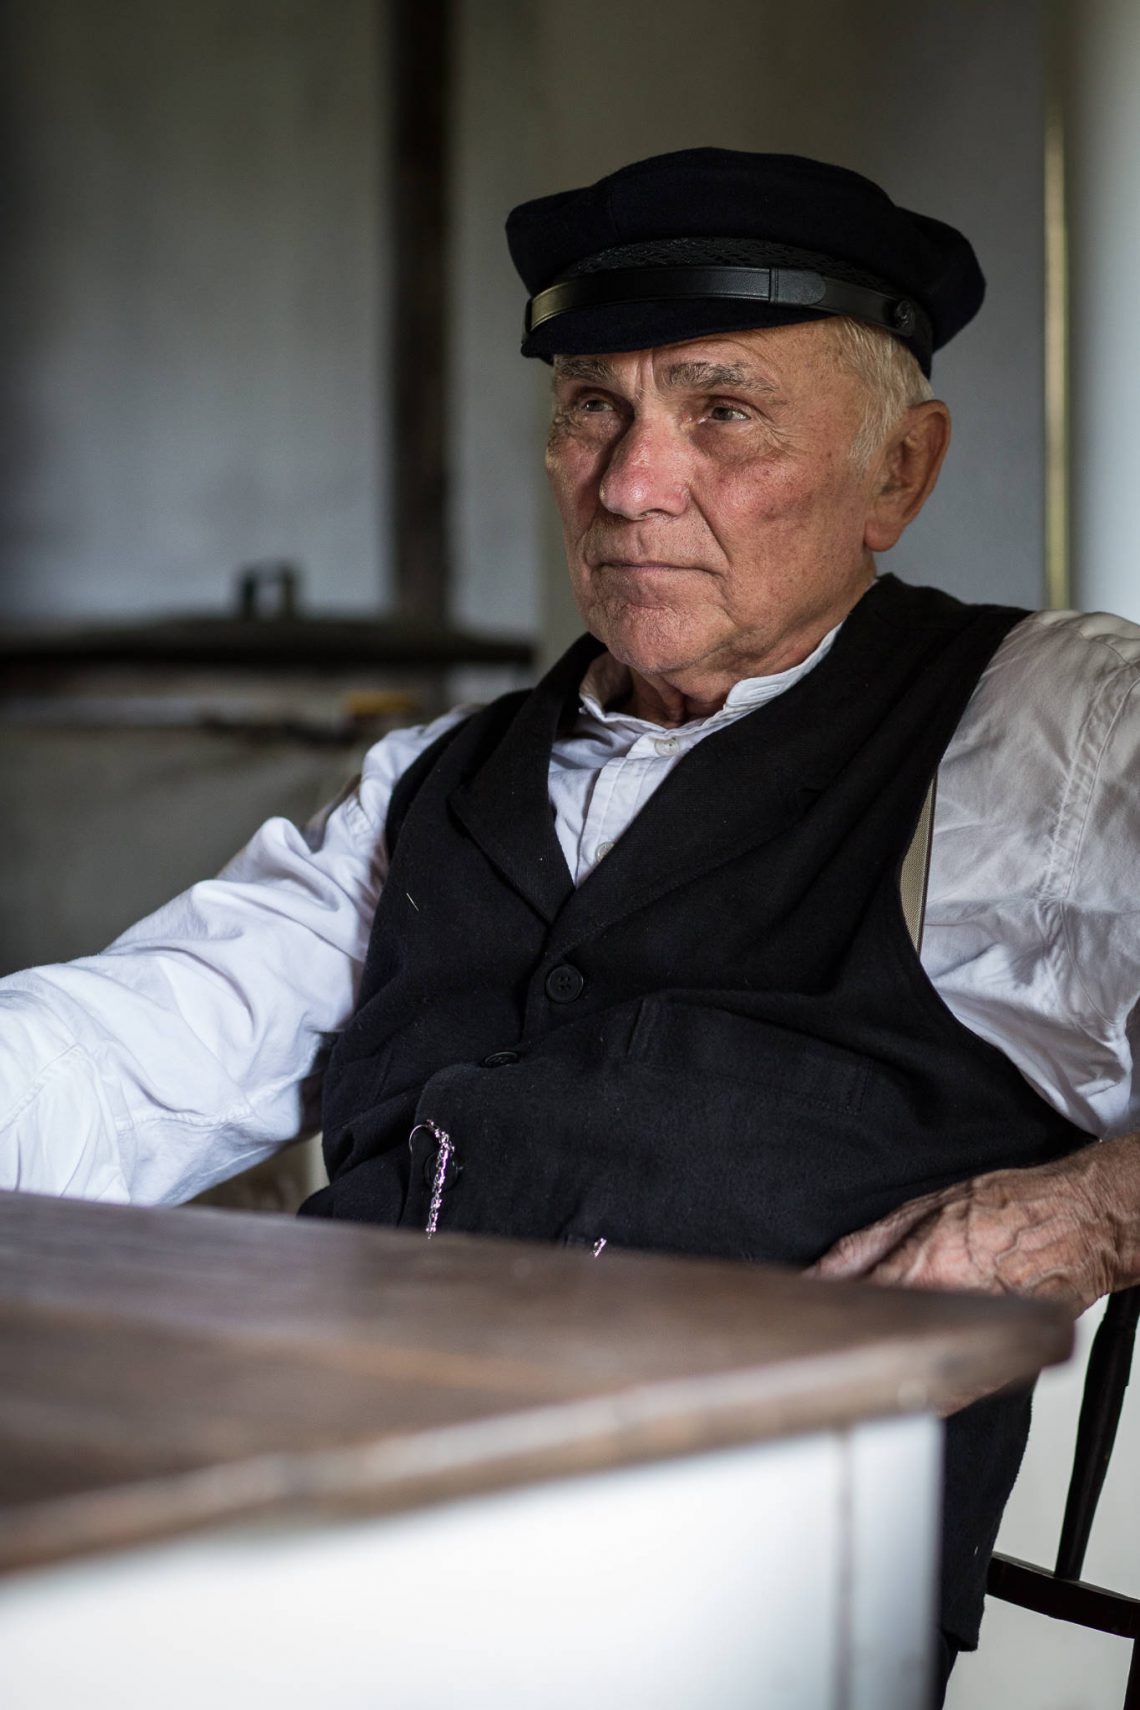 Living History 1914 - Old Fisherman from the Elbe